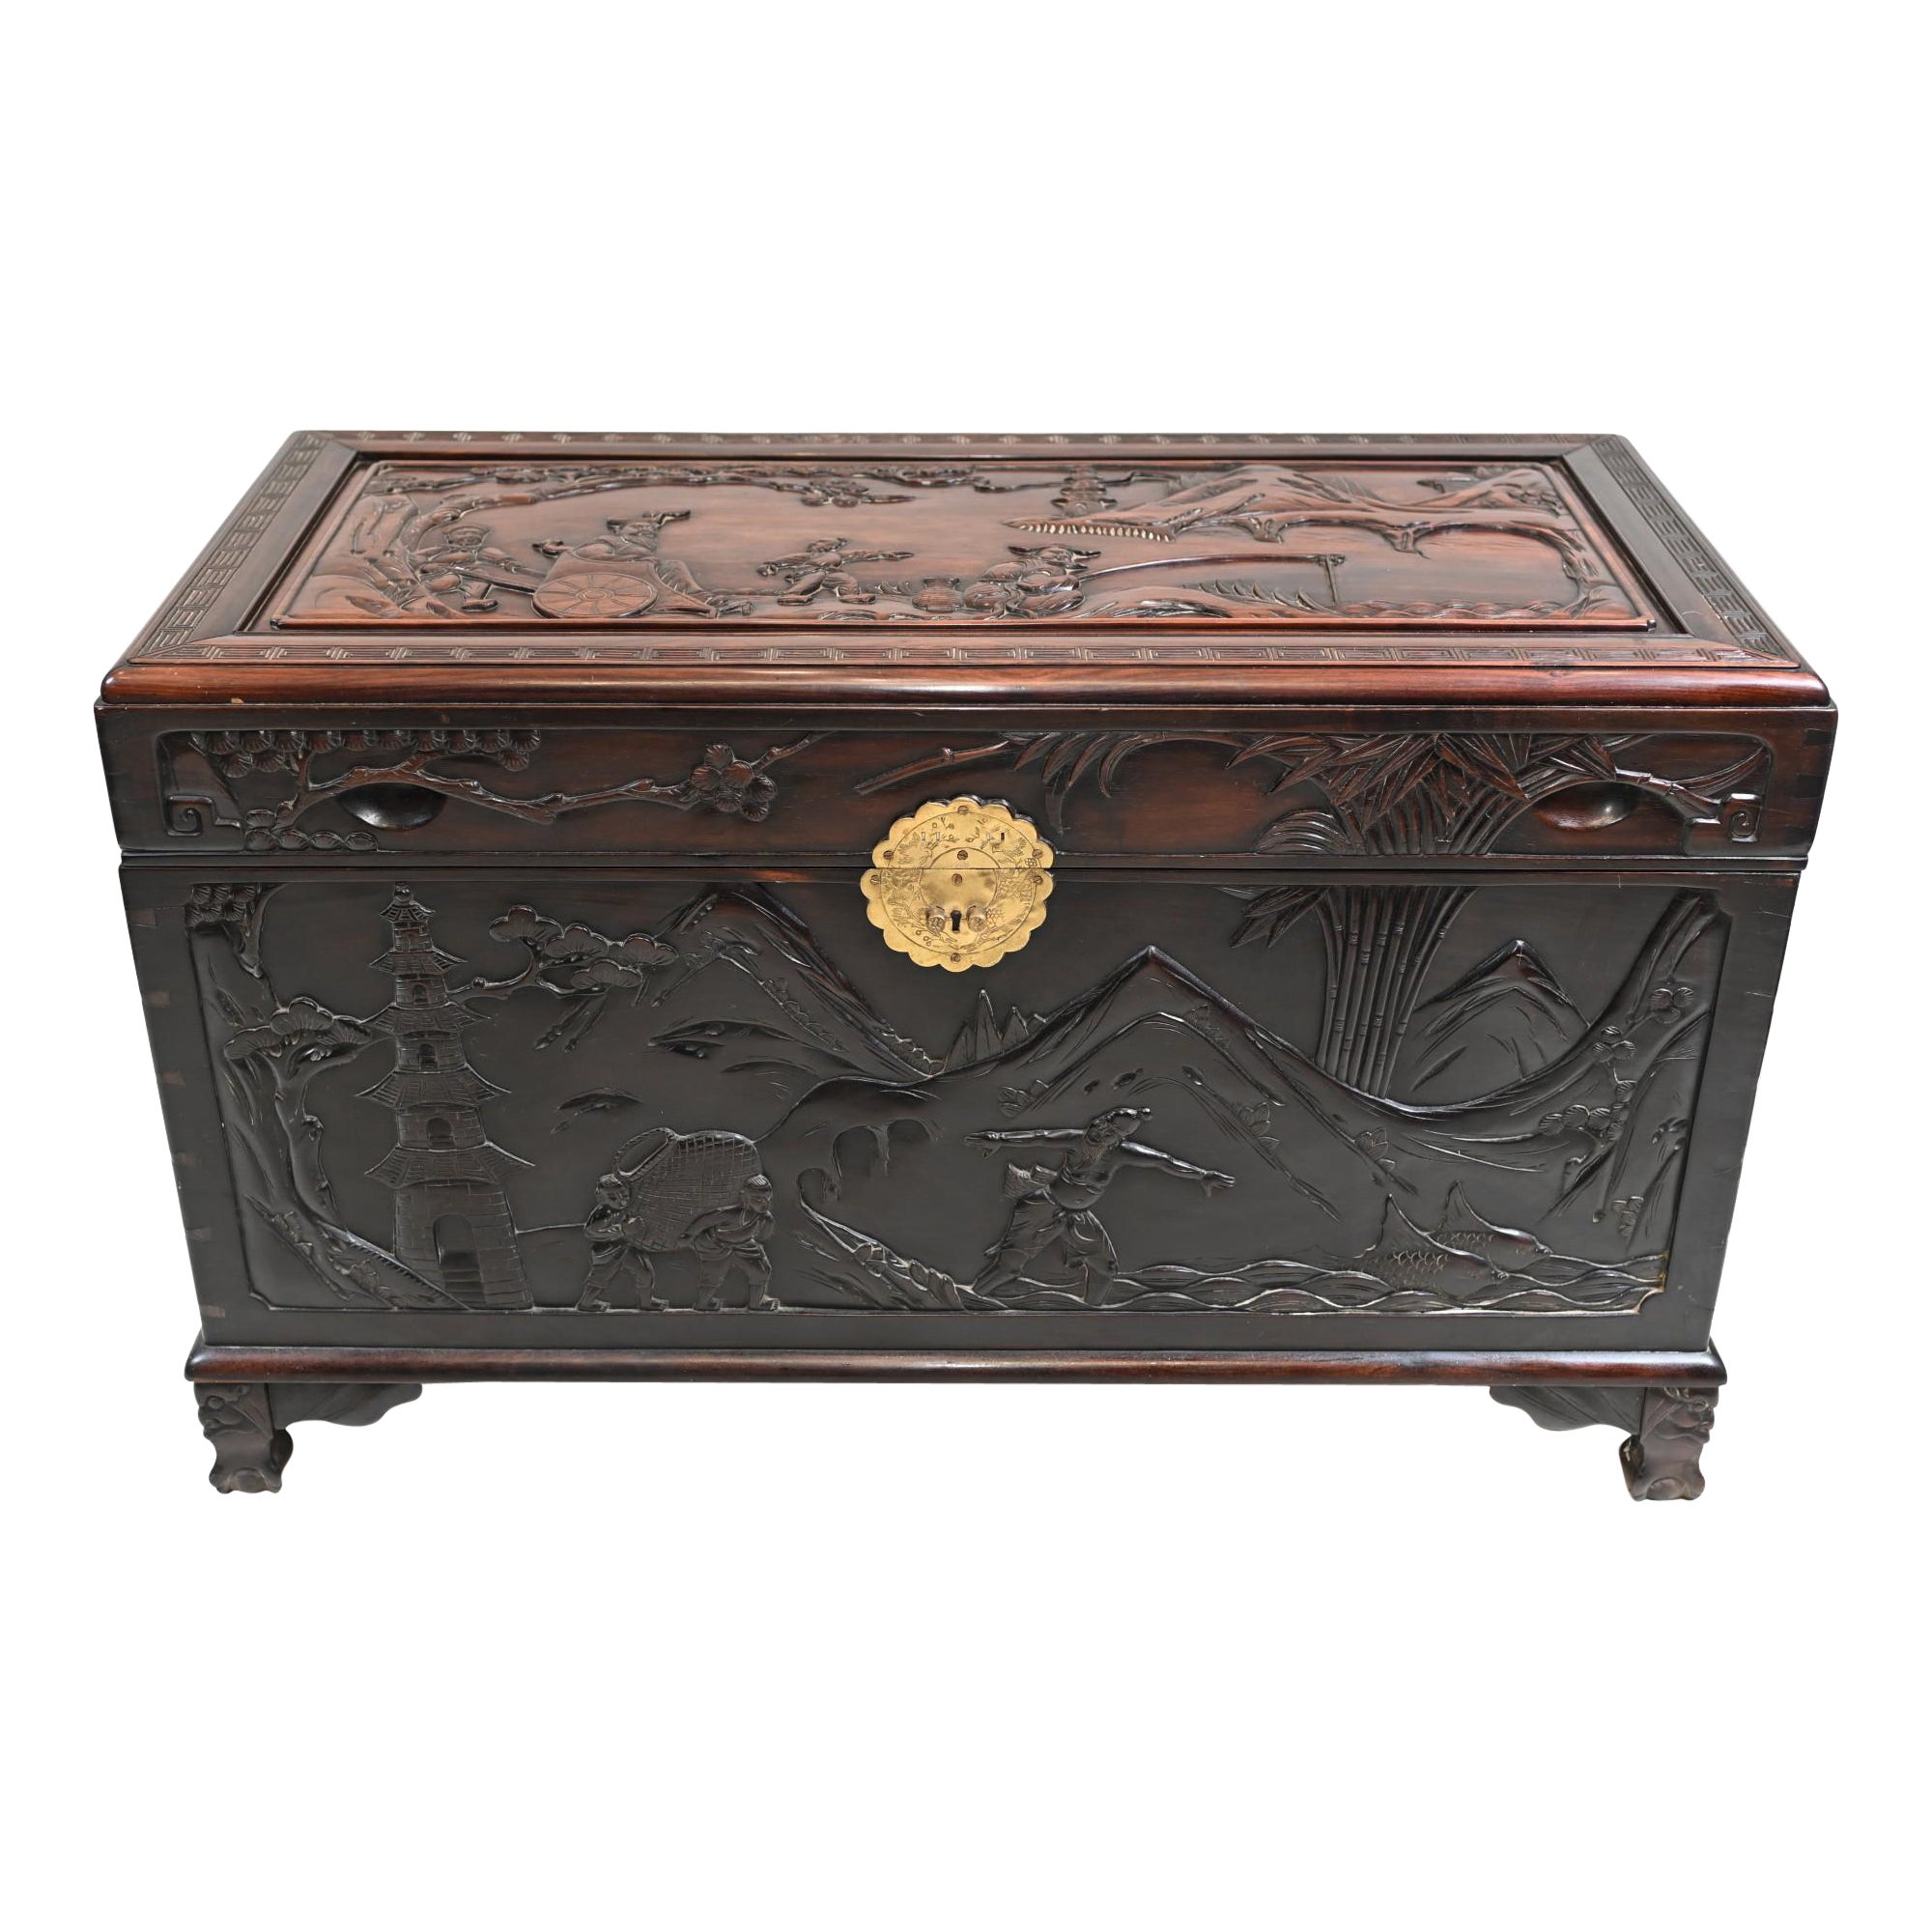 Chinese Camphor Chest Hardwood Carved Luggage Box 1880 For Sale